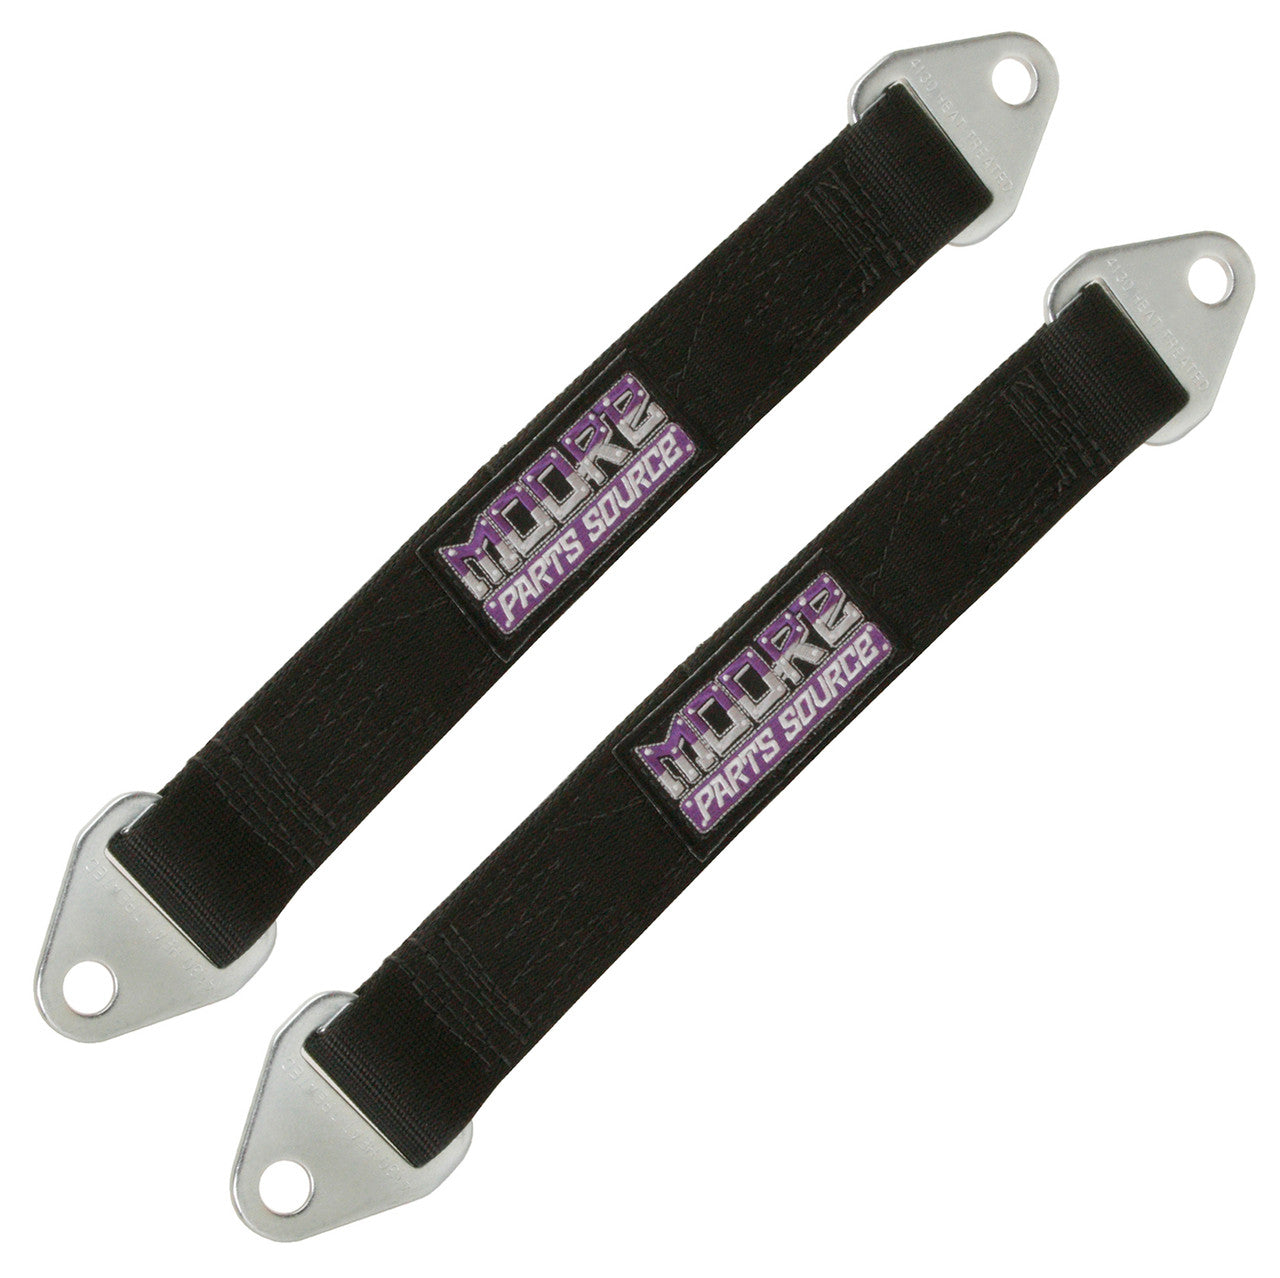 17 Inch USA Made Off-Road Suspension Limit Straps, Sold As Pair